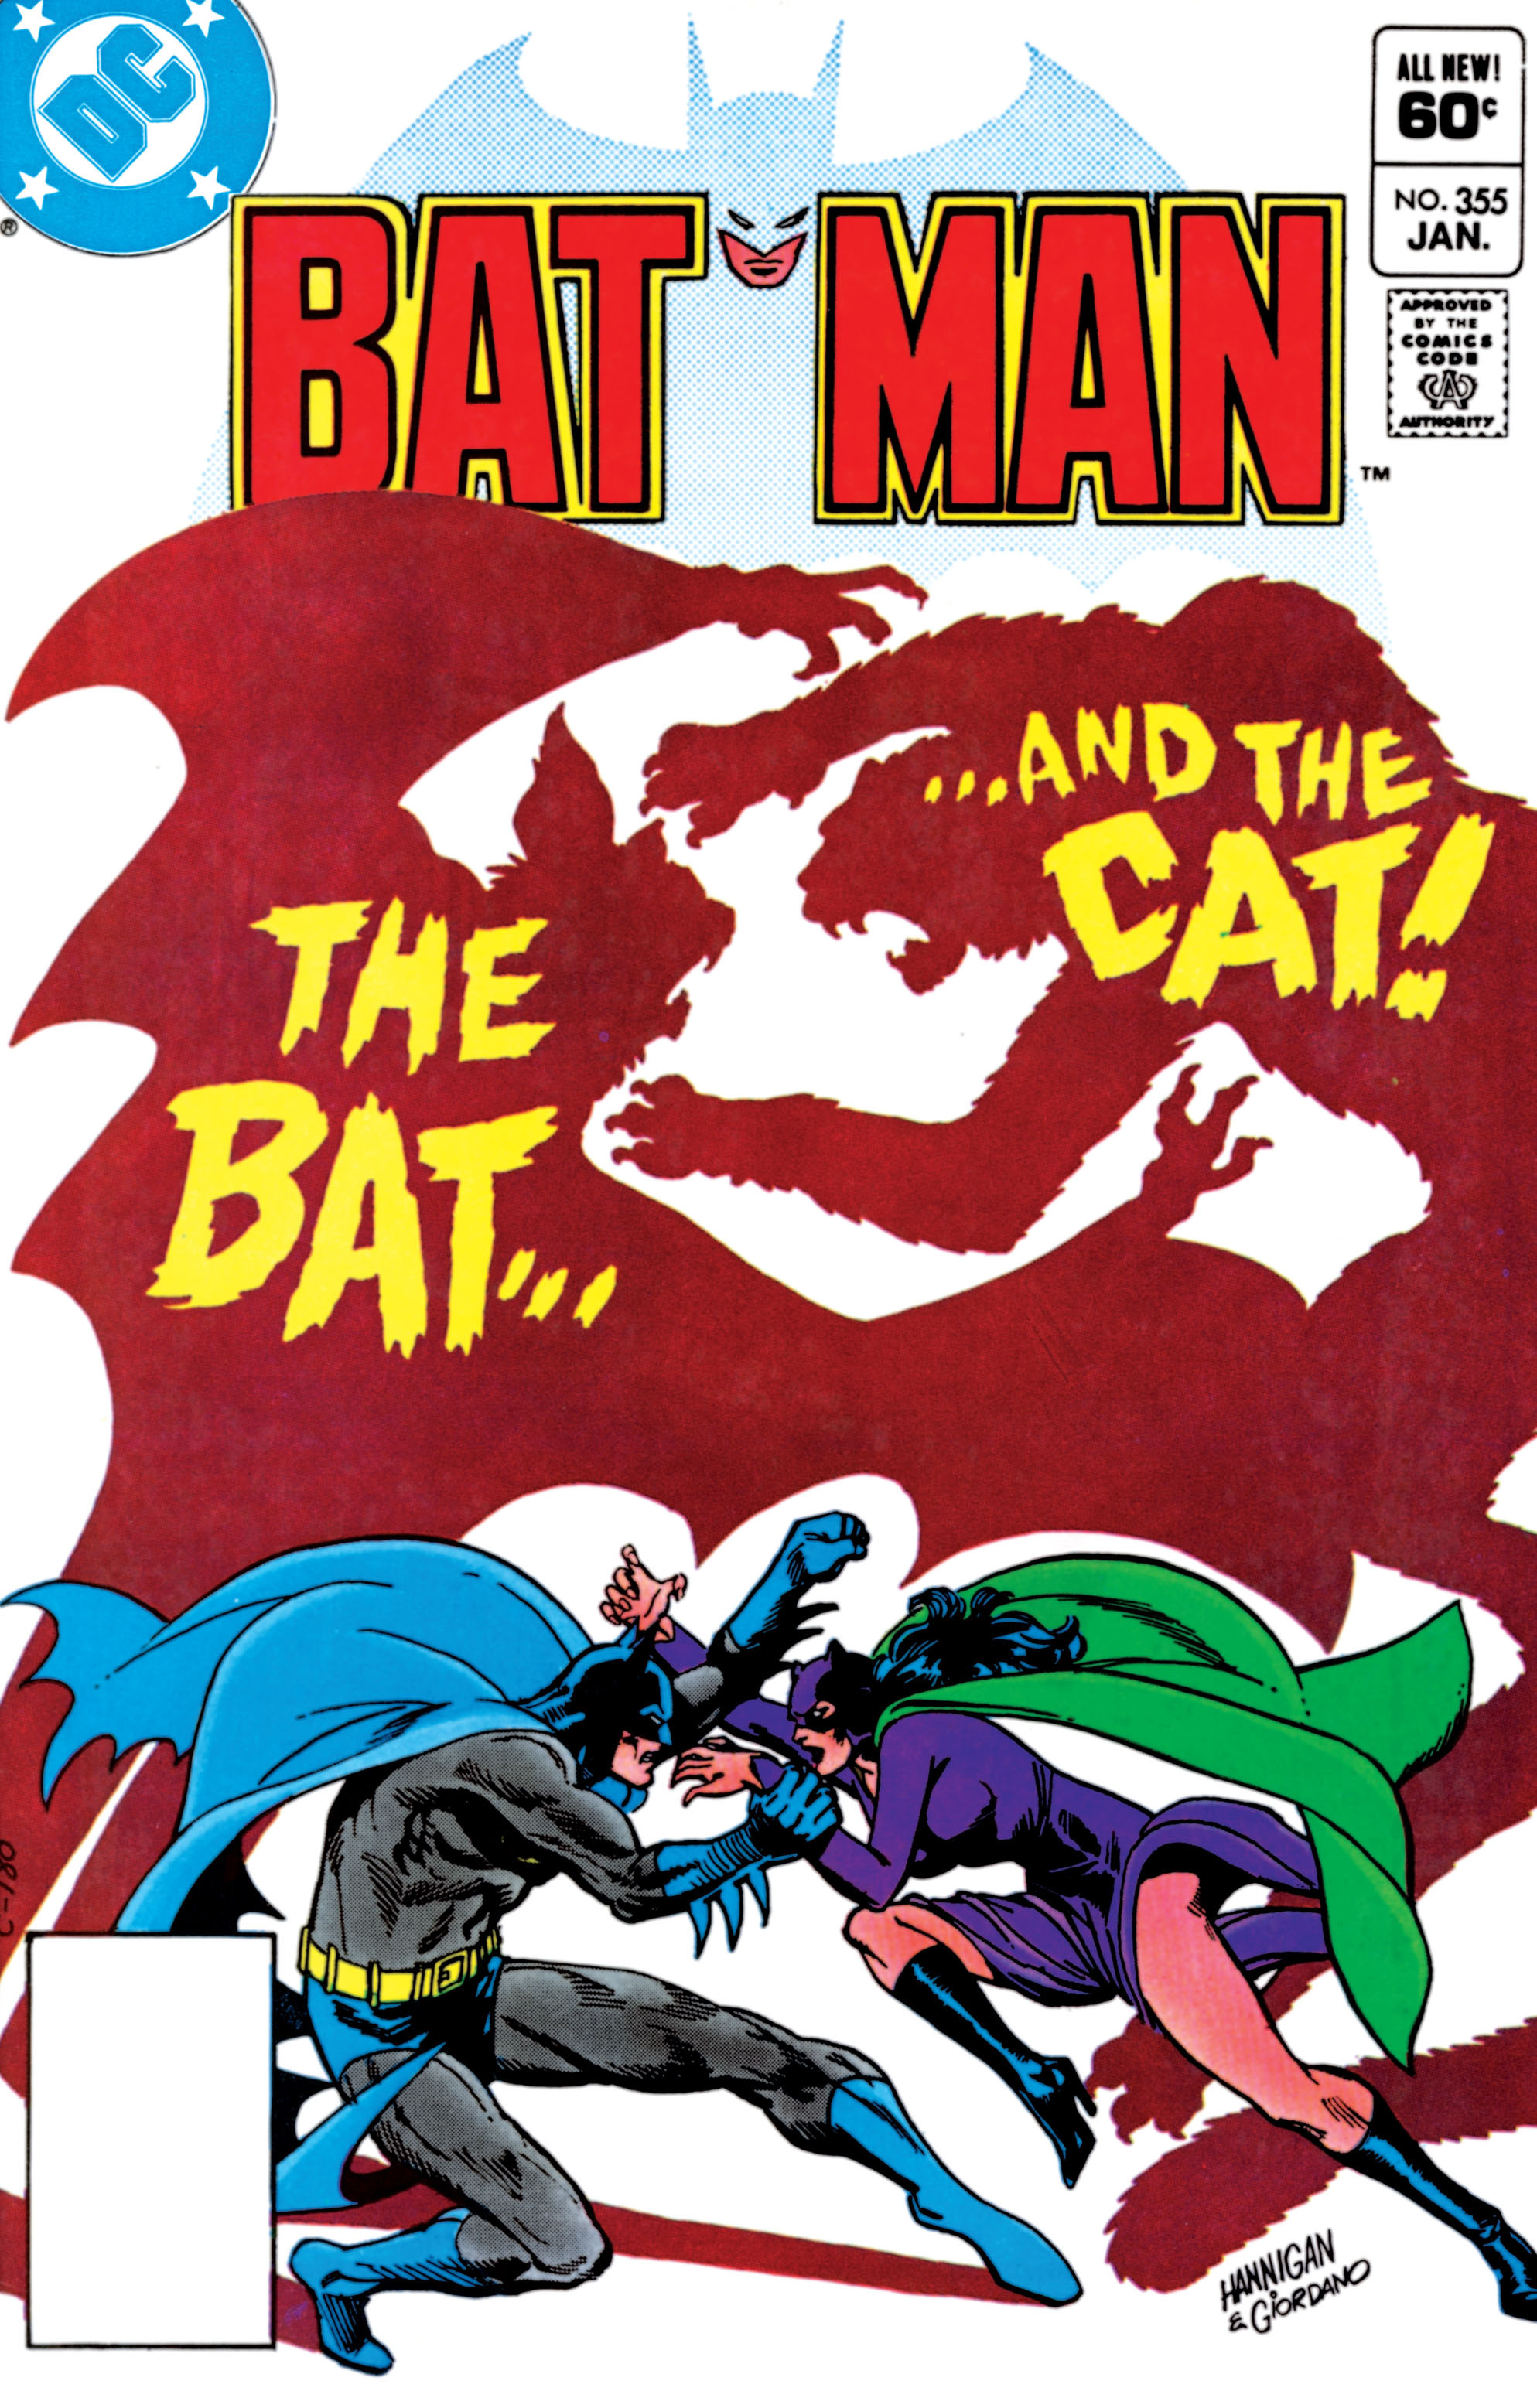 Batman 1940 Issue 355 | Read Batman 1940 Issue 355 comic online in high  quality. Read Full Comic online for free - Read comics online in high  quality .|